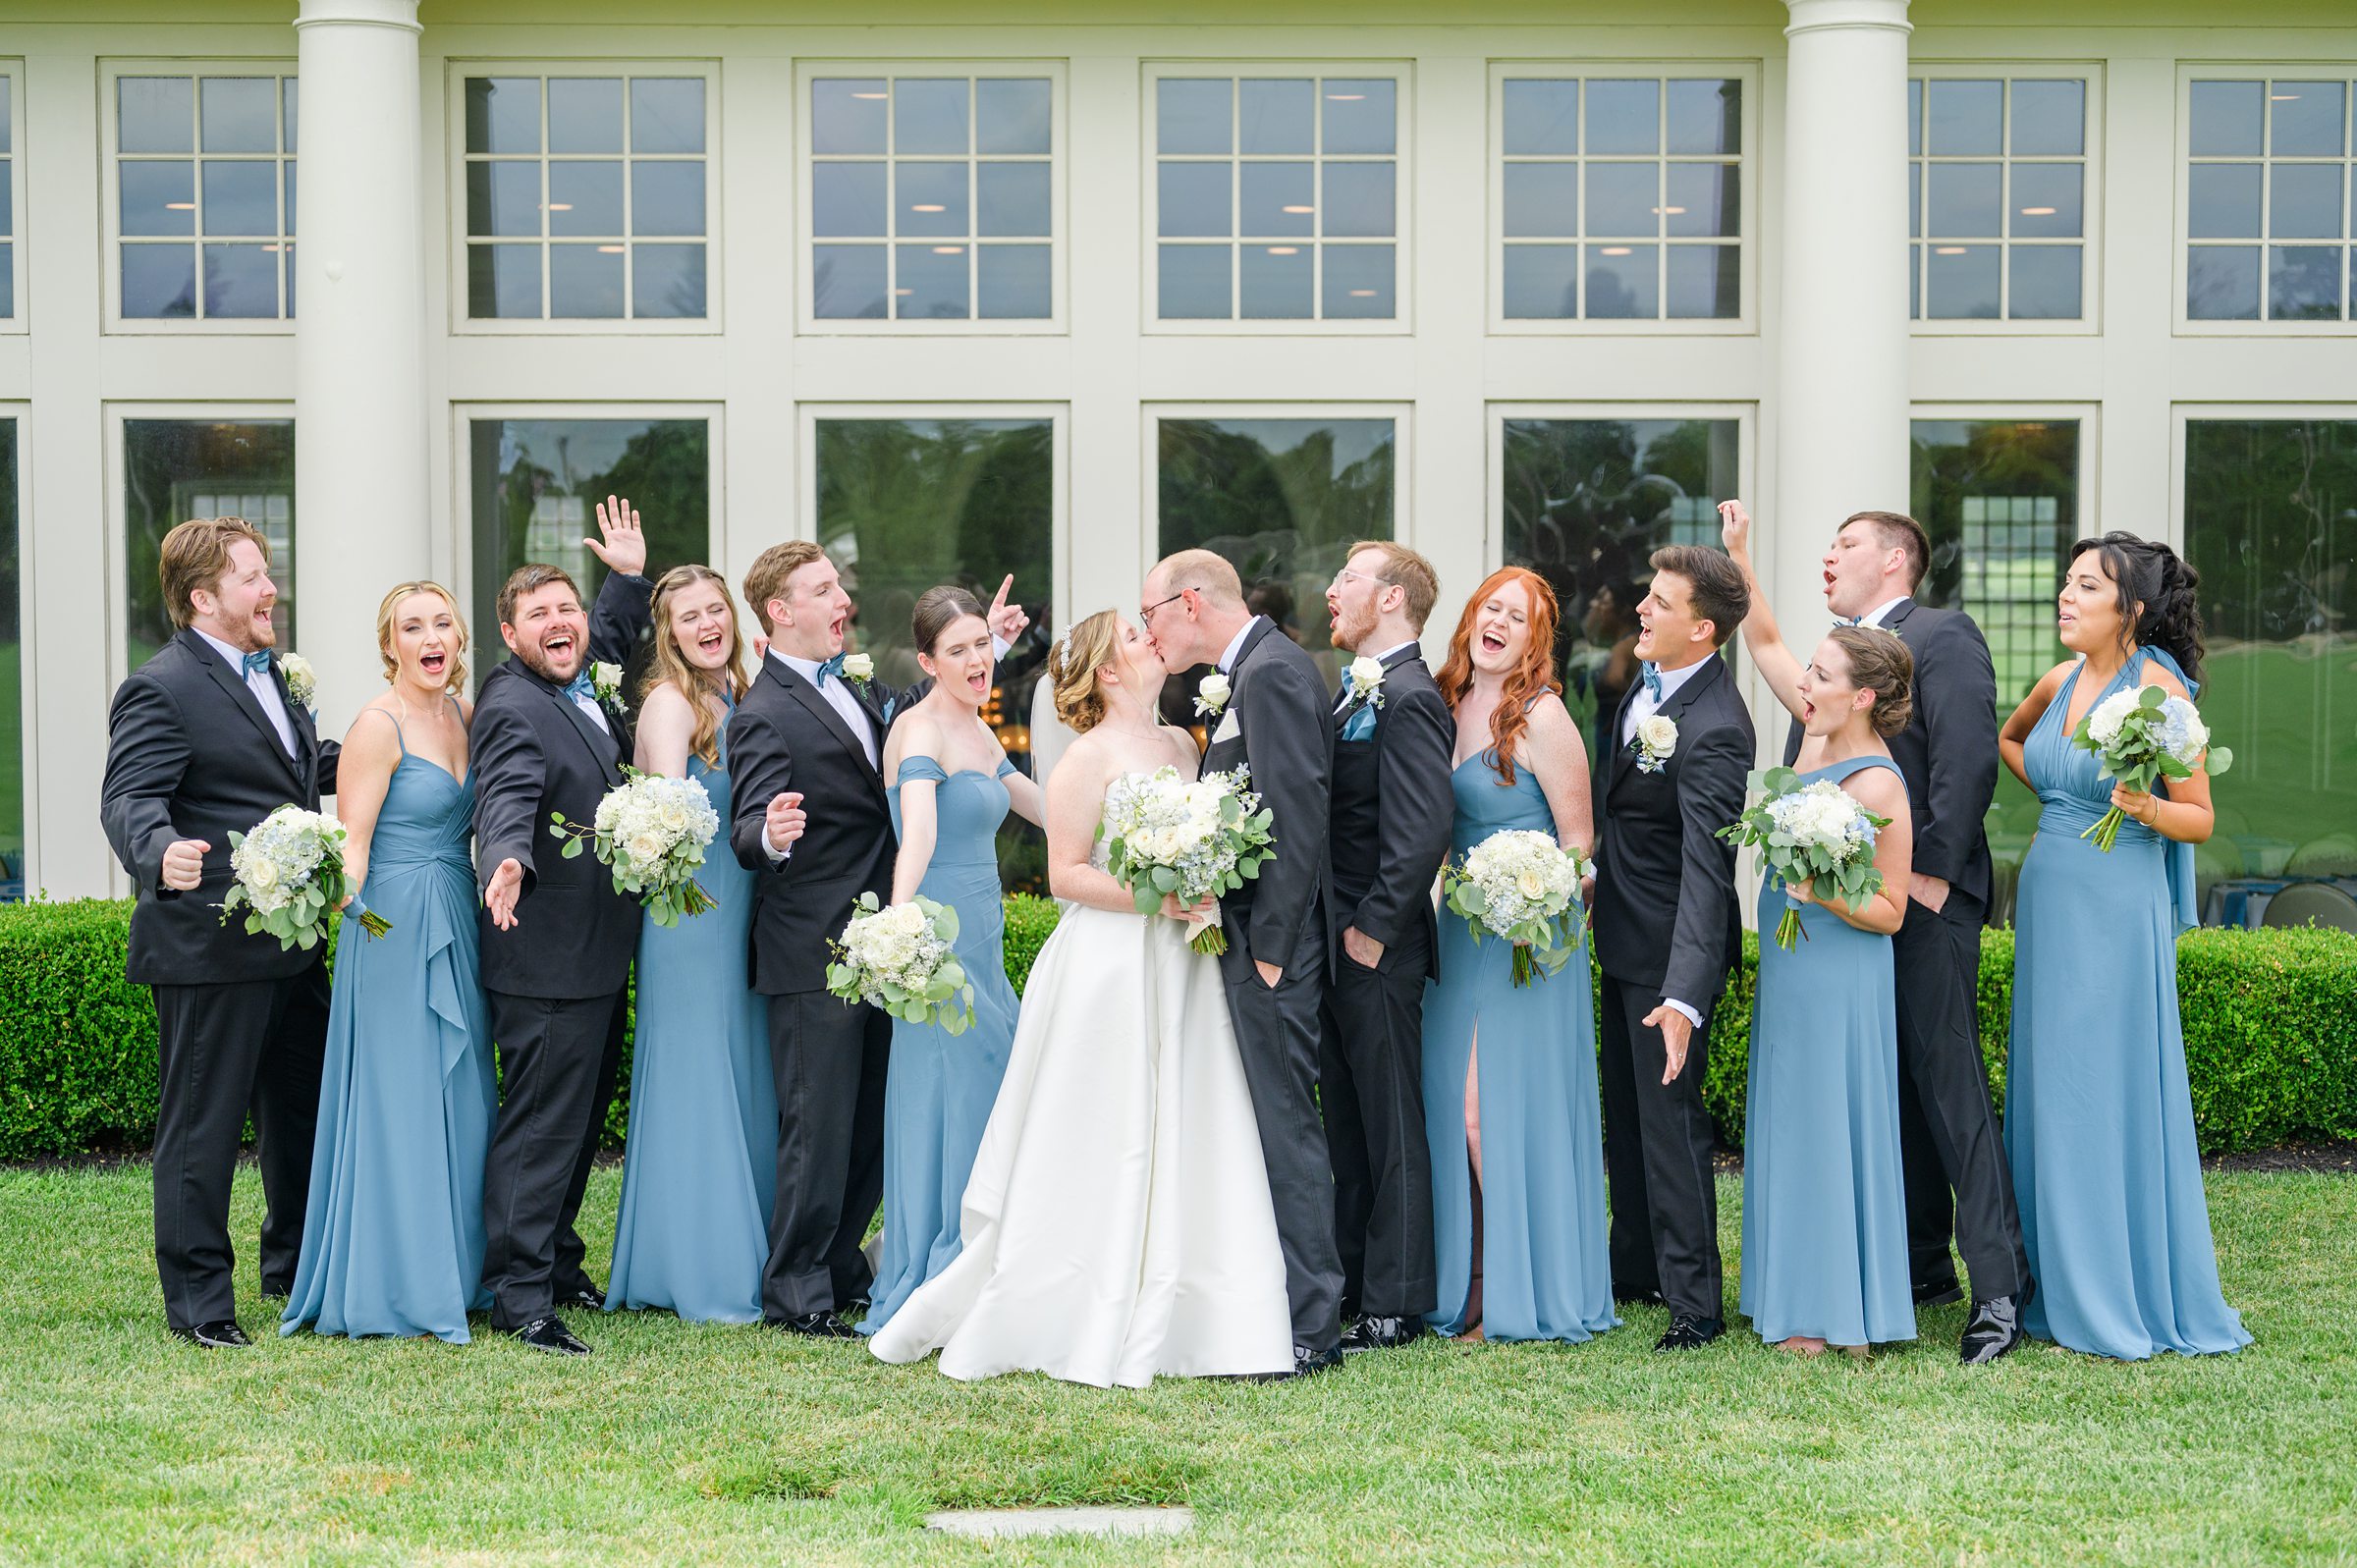 Blue and White Summer wedding day at the Philadelphia Cricket Club Photographed by Baltimore Wedding Photographer Cait Kramer Photography